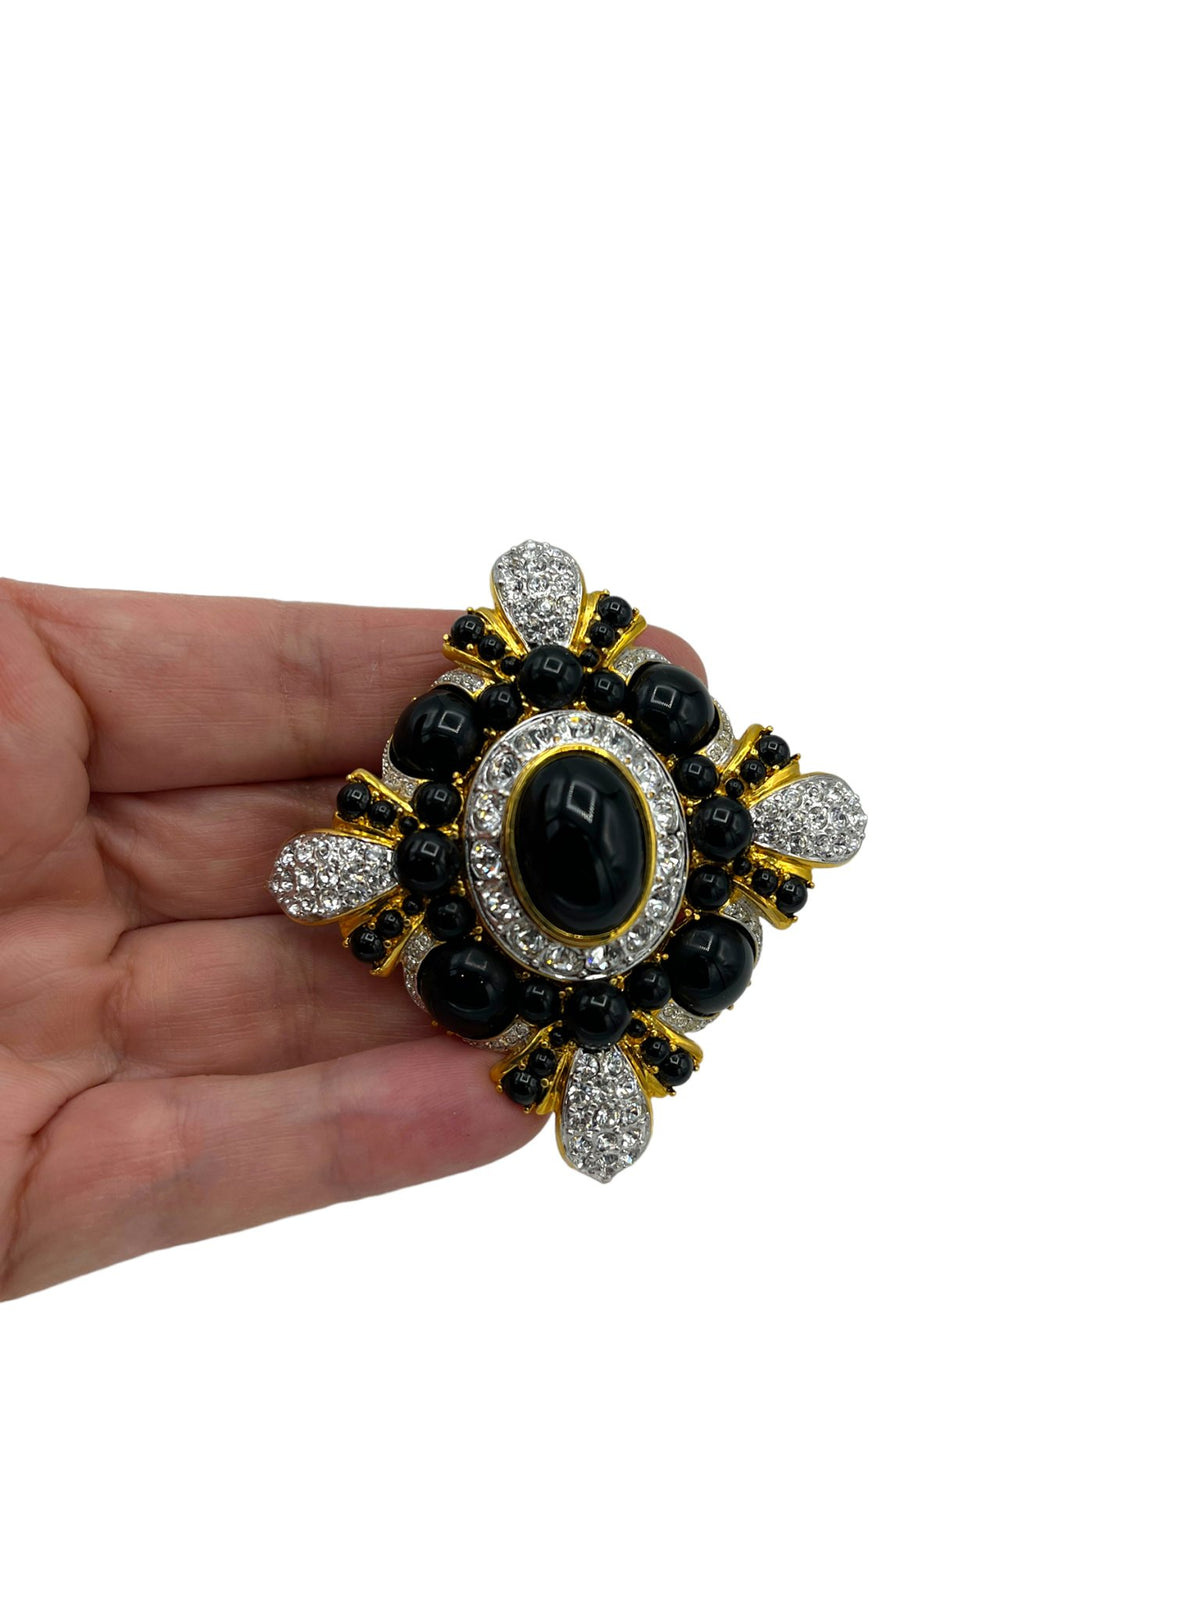 Gold Joan Rivers Black Onyx Cabochon Maltese Cross Vintage Brooch - 24 Wishes Vintage Jewelry